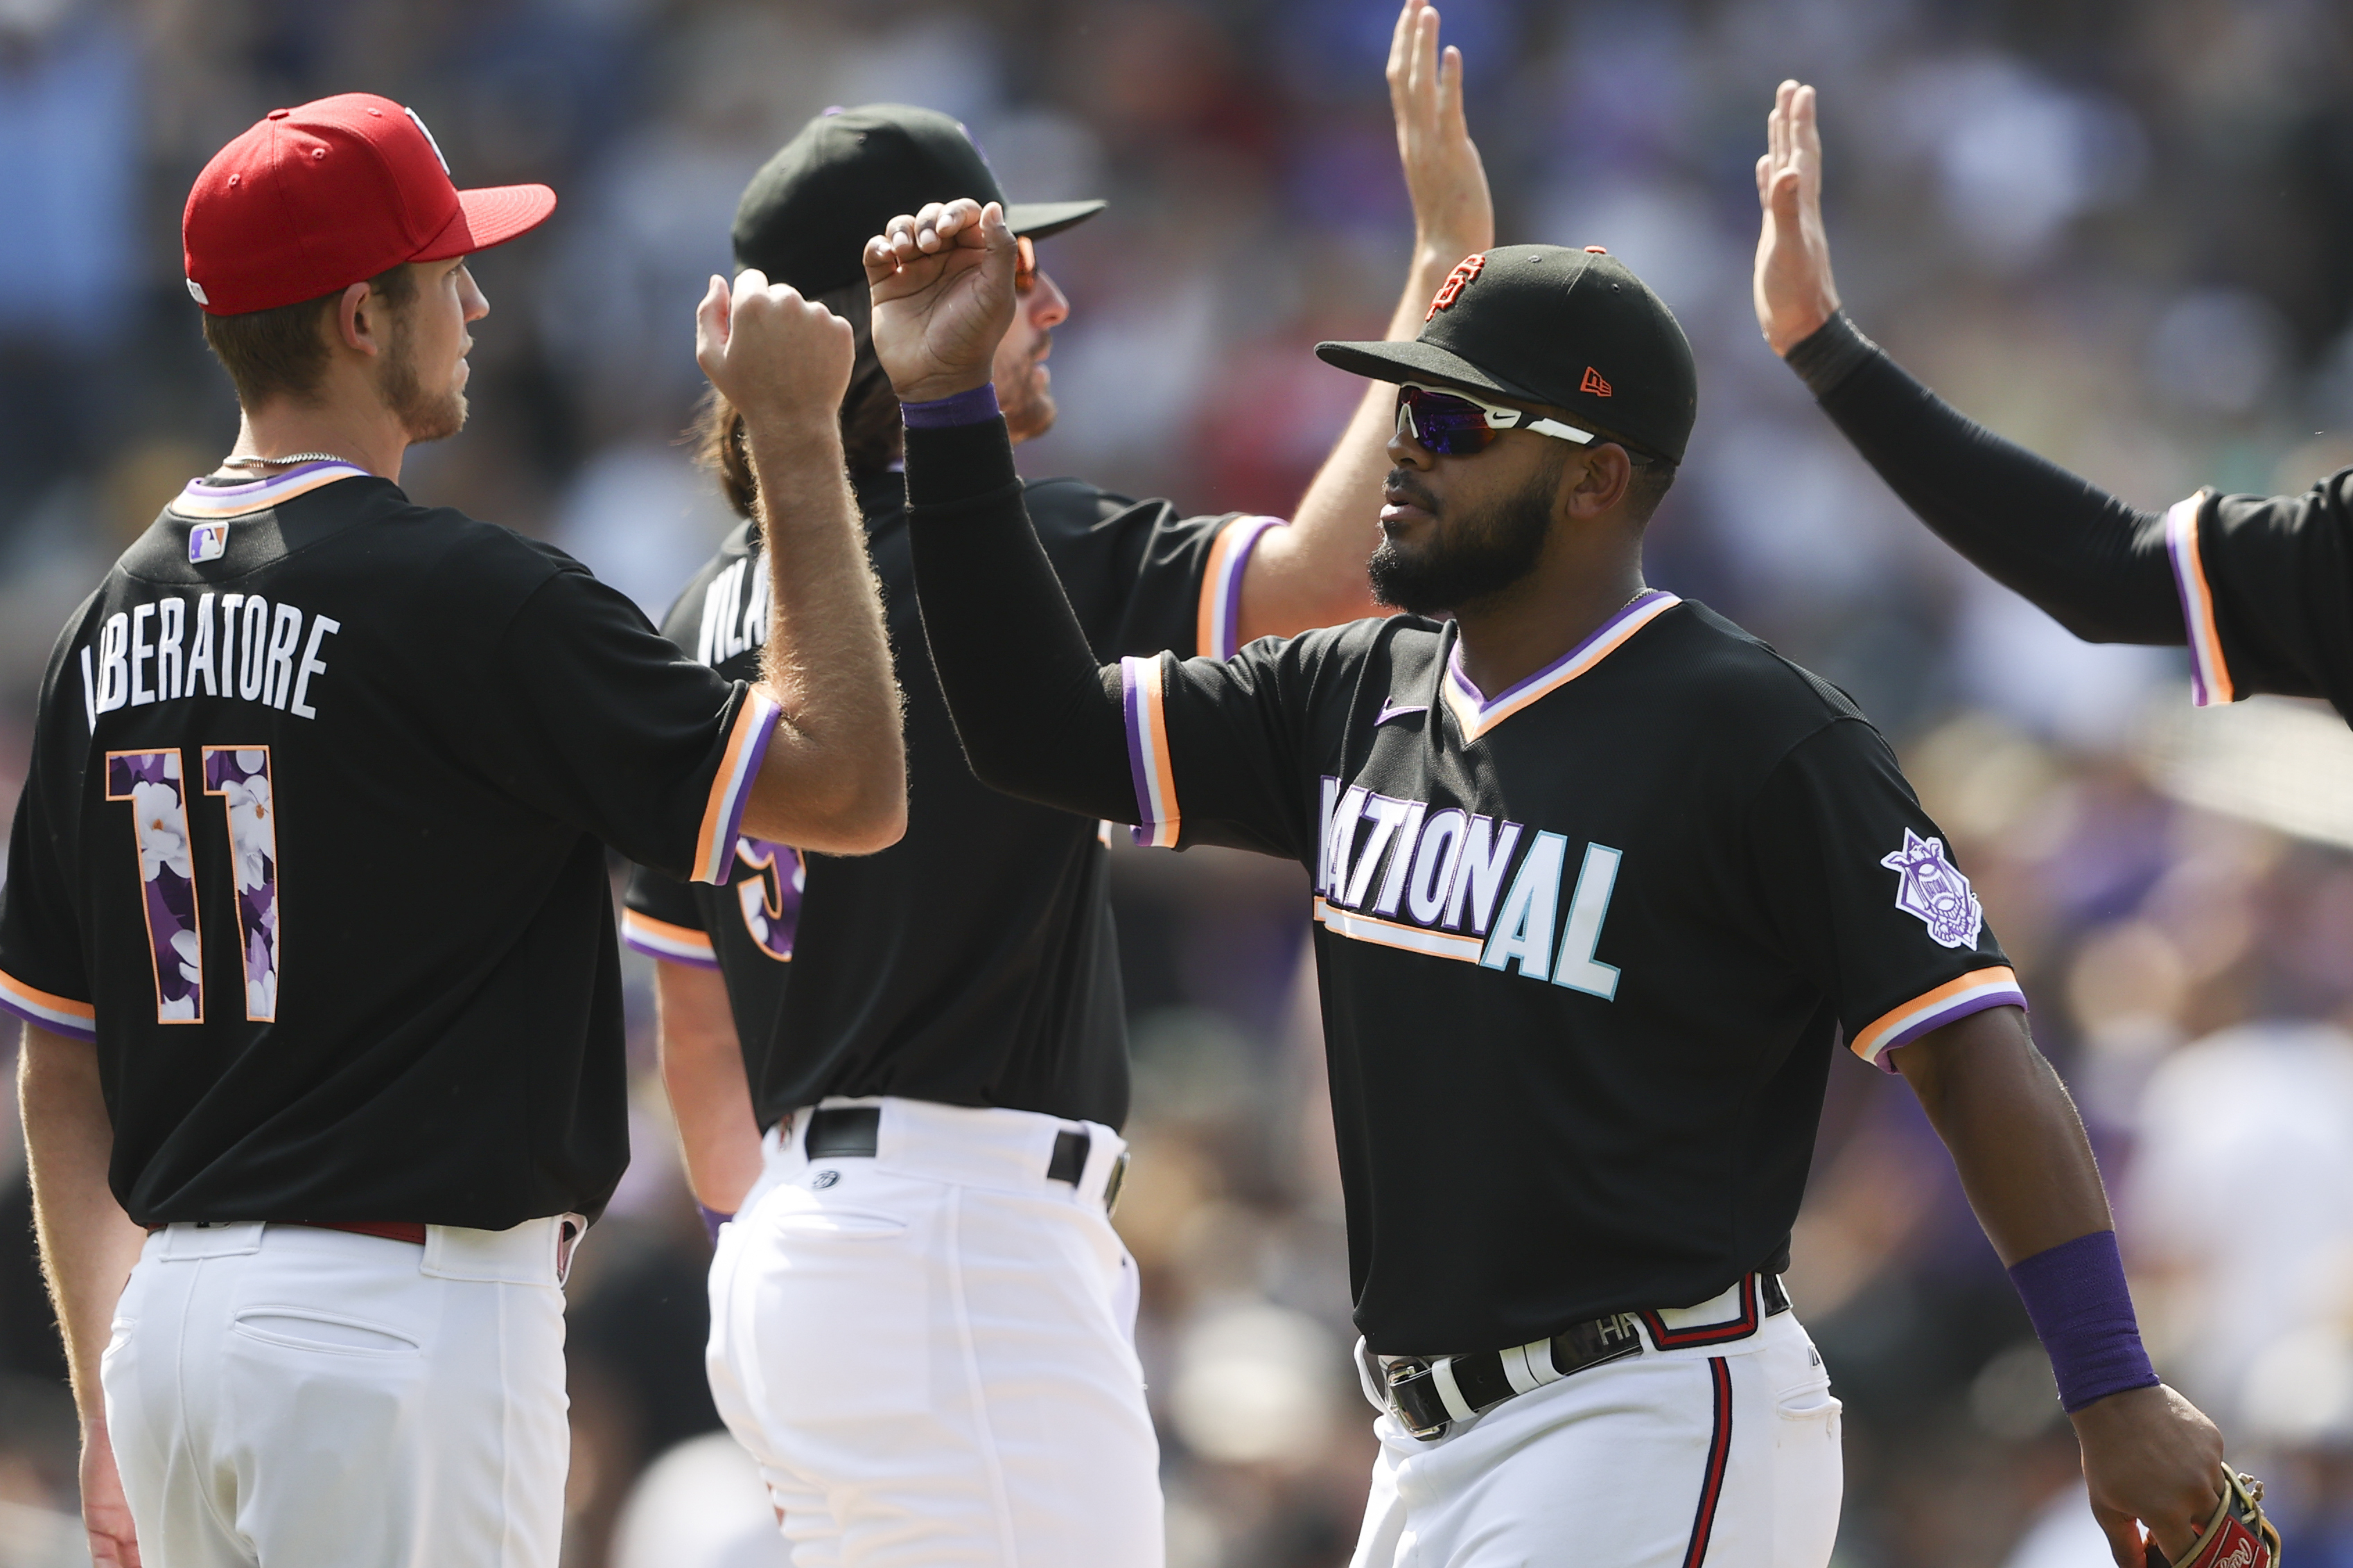 PHOTOS: 2021 MLB All-Star Futures Game at Coors Field